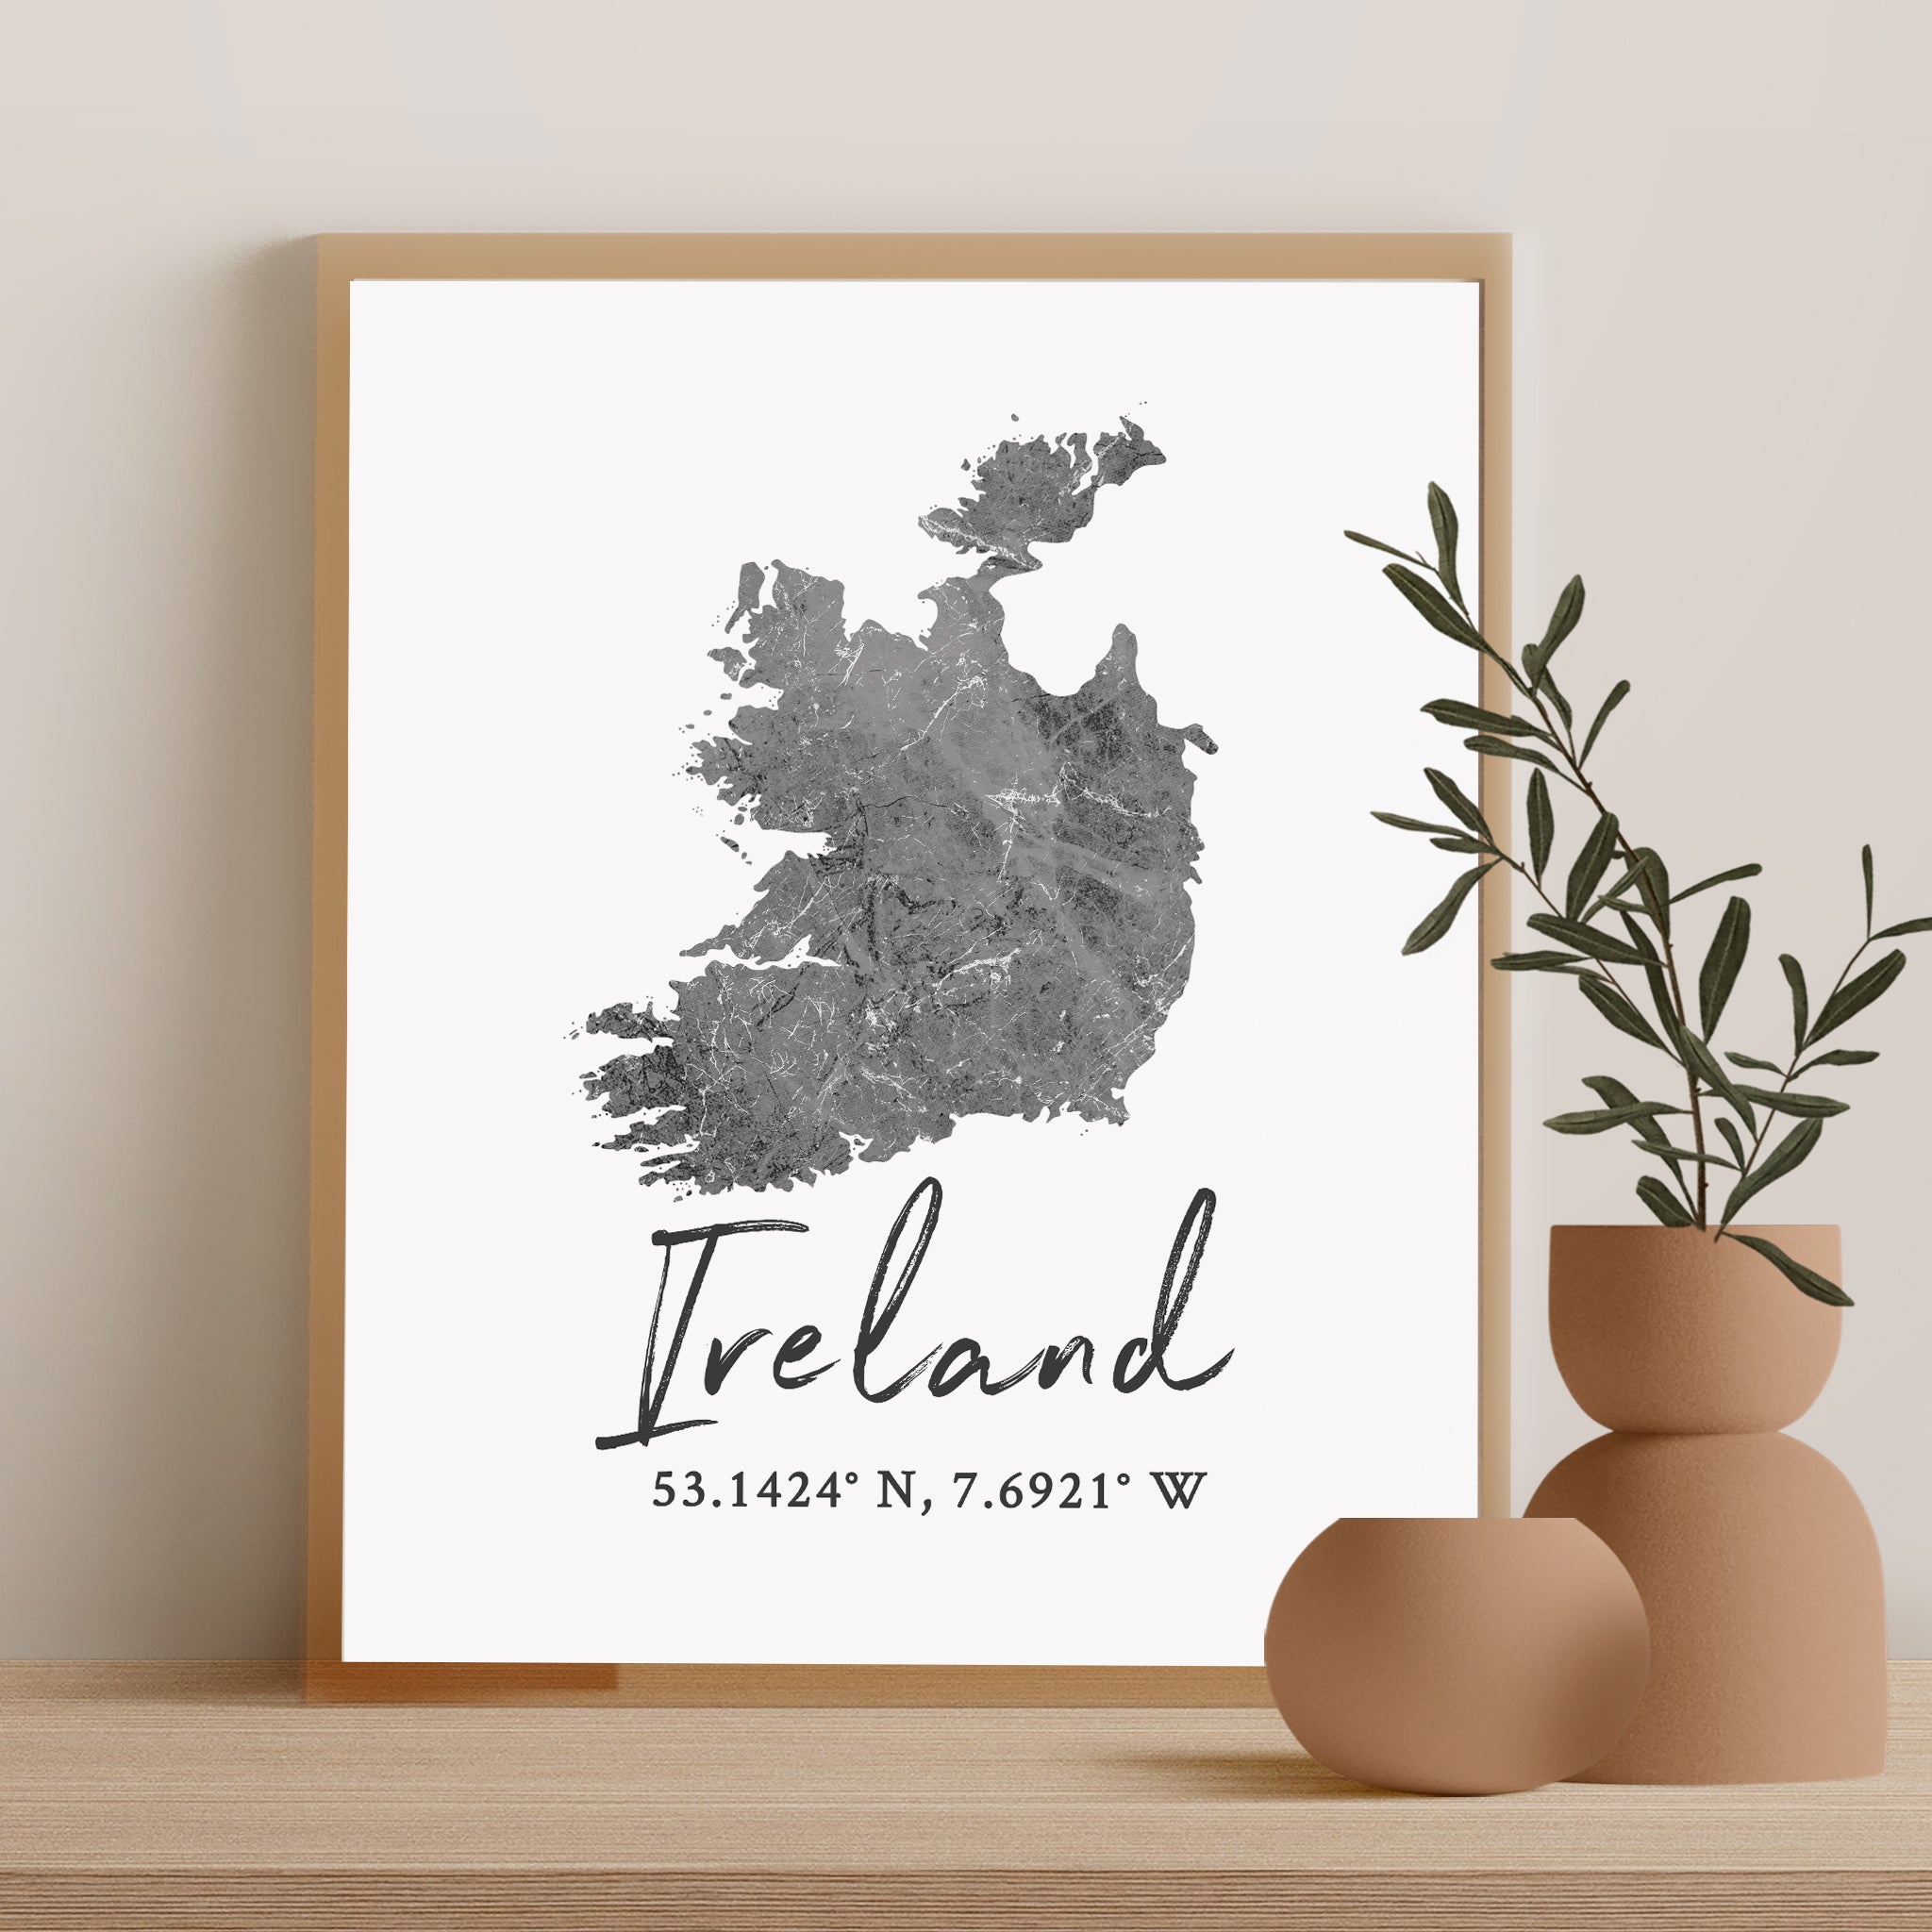 Ireland Country Map